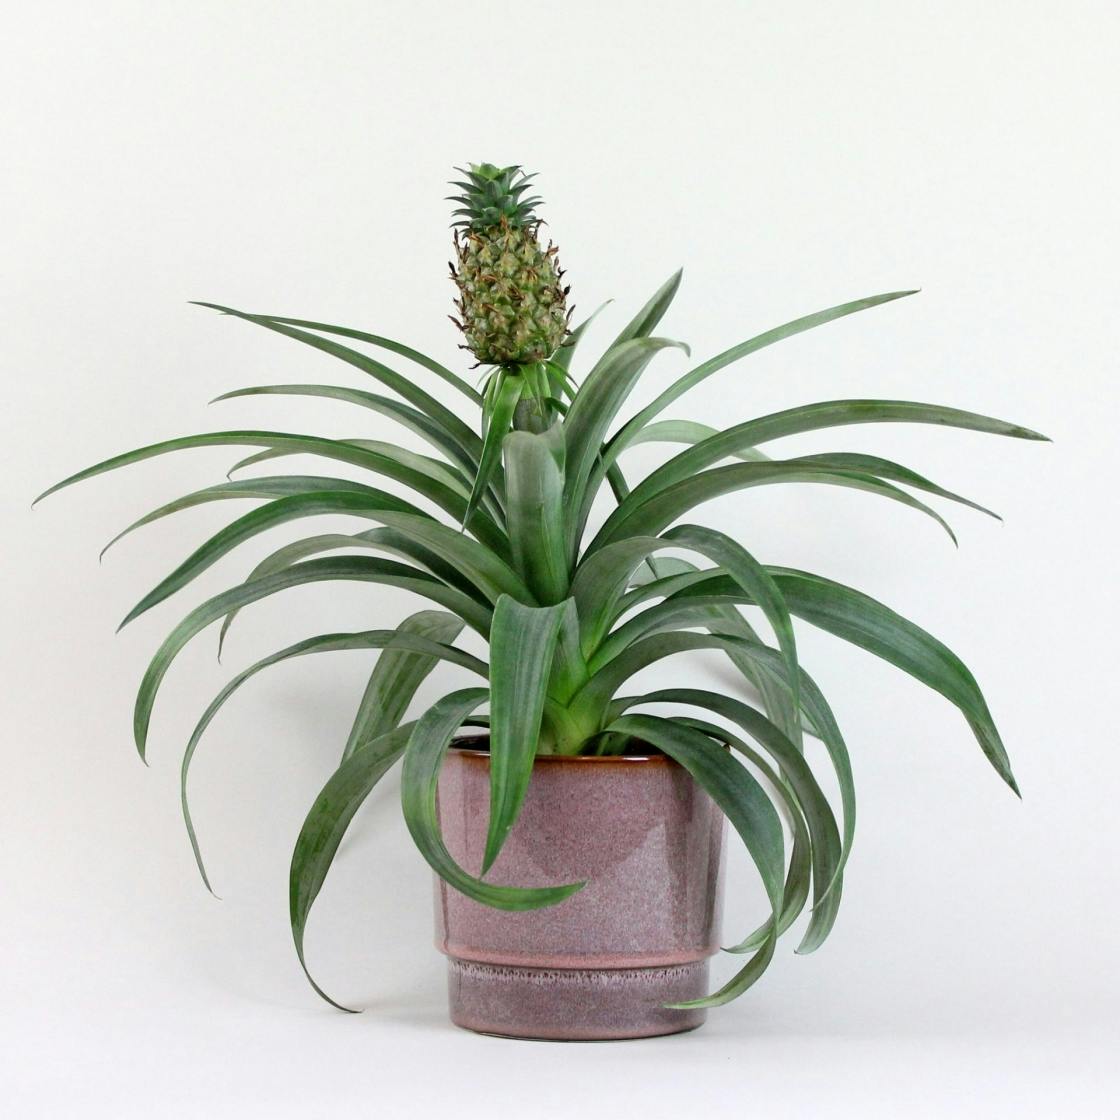 7 unusual houseplants to add a splash of excitement to ...